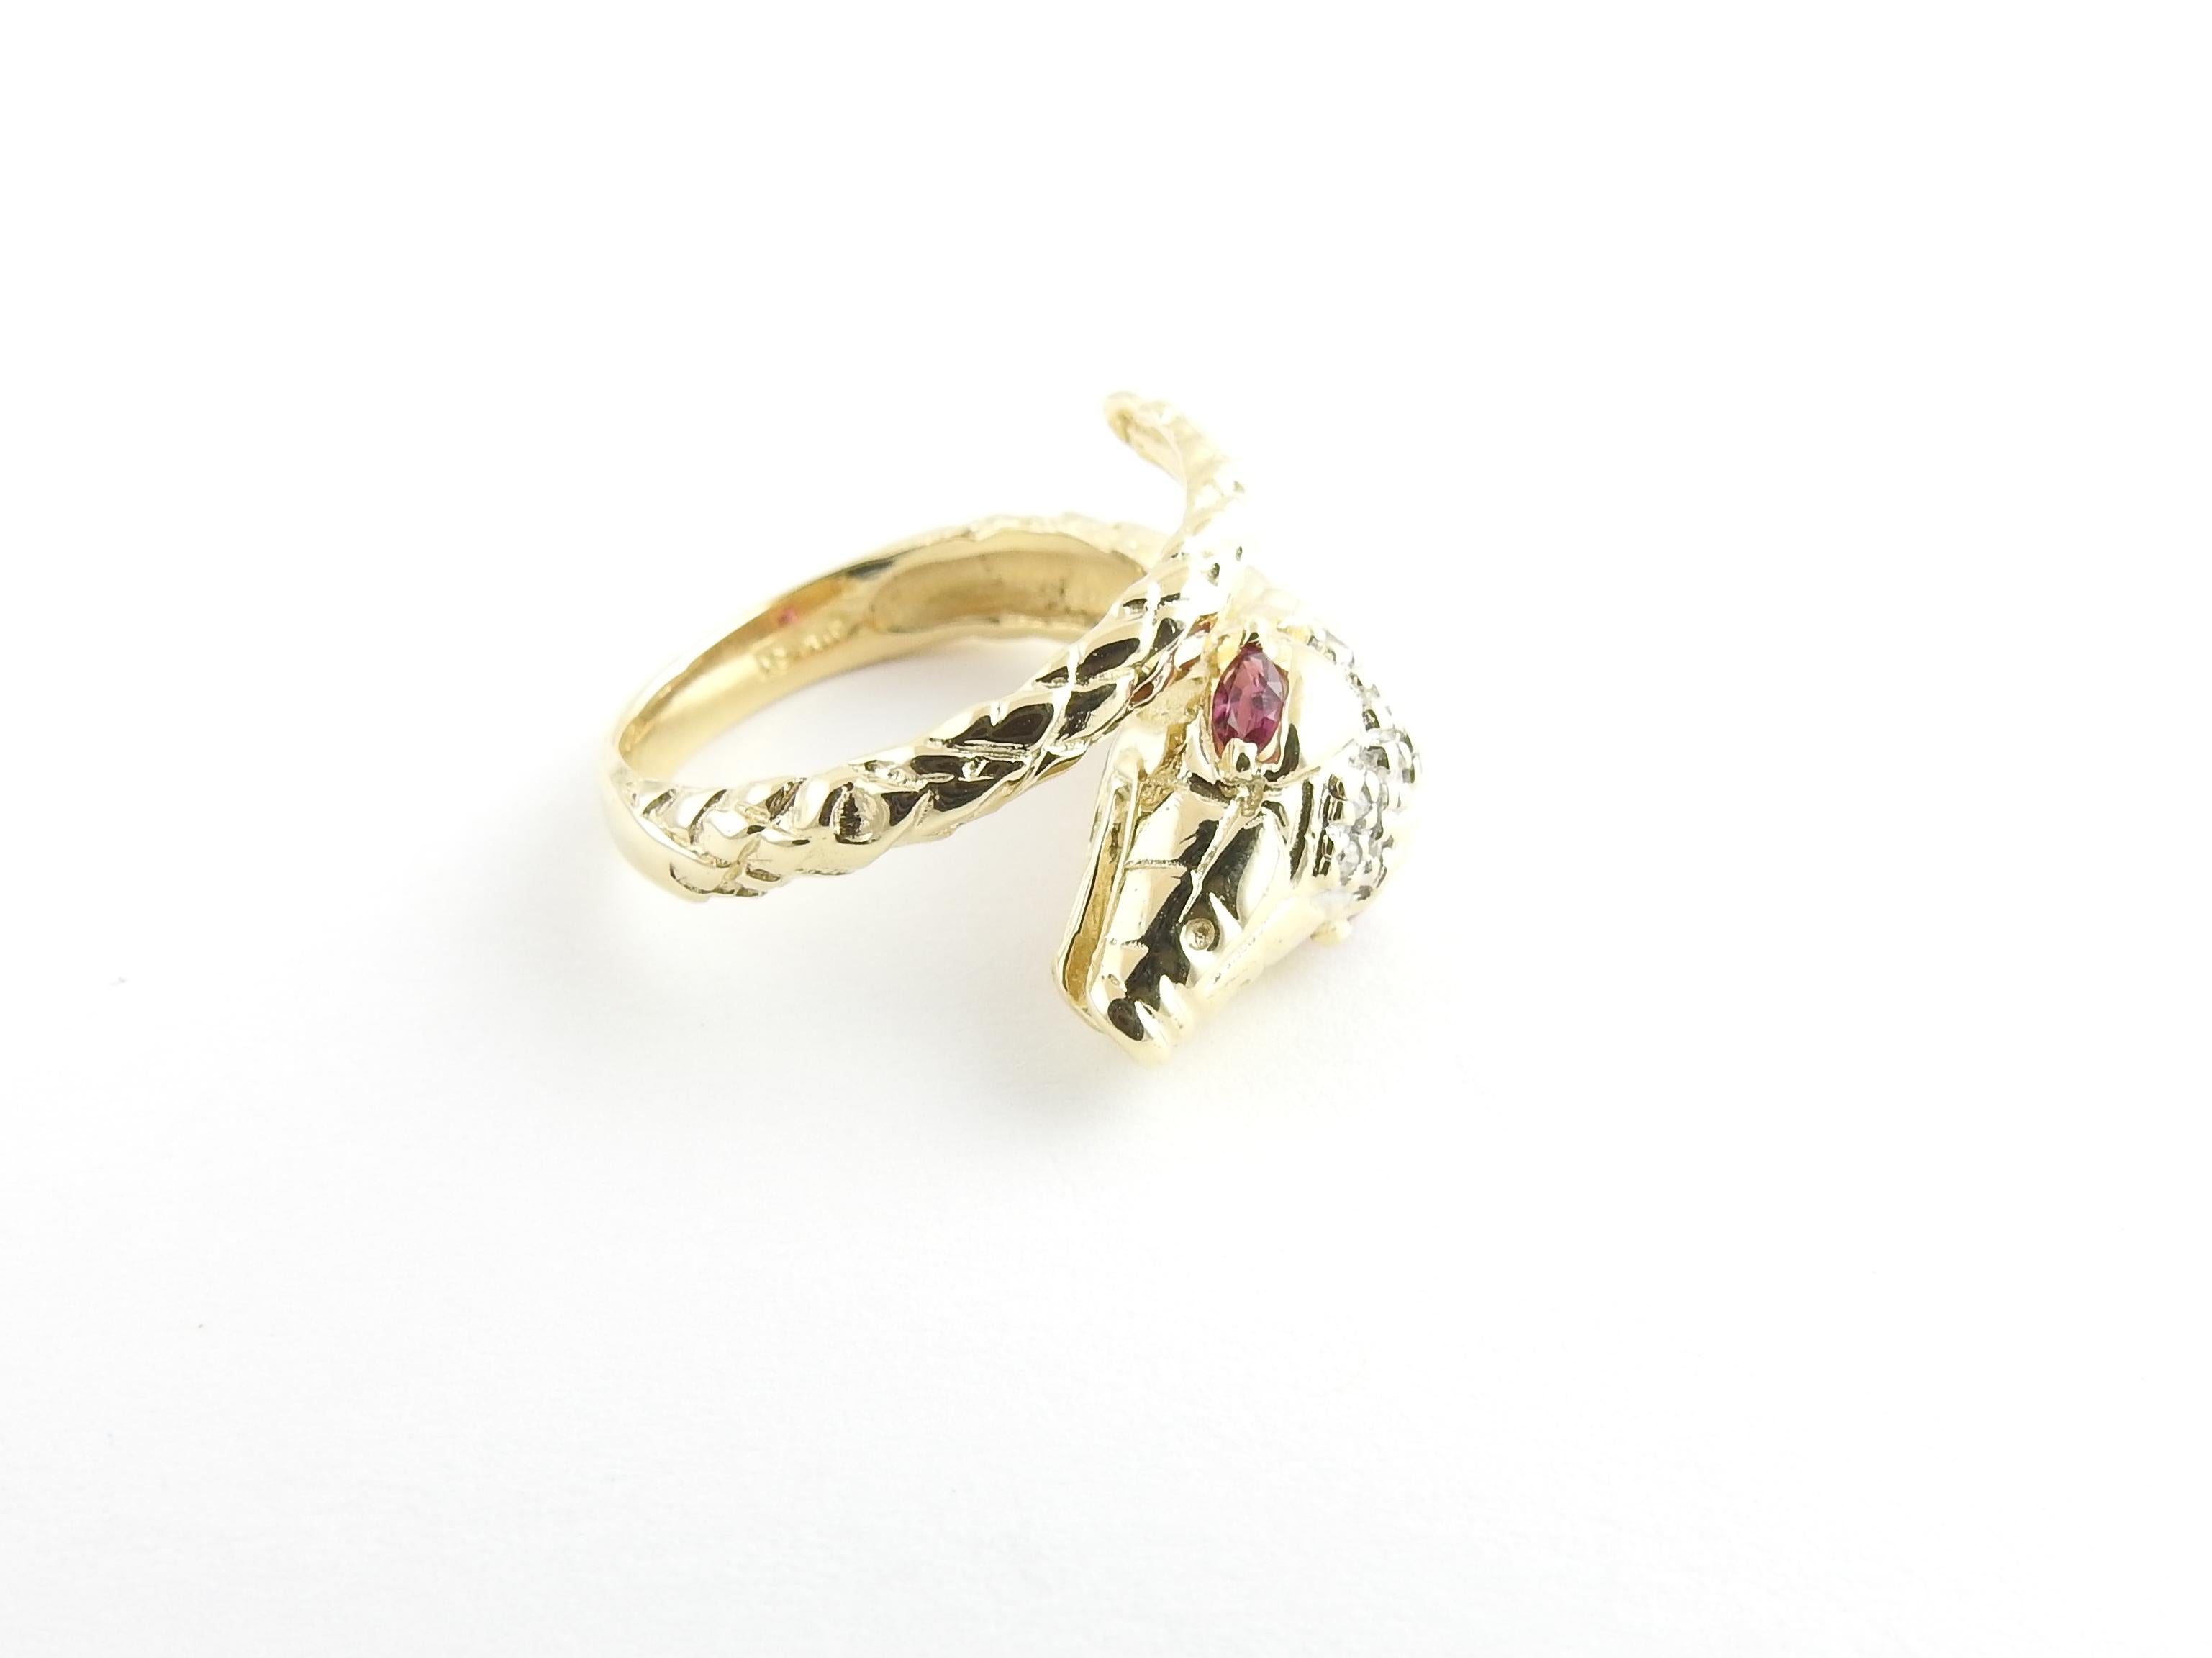 Vintage 14 Karat Yellow Gold Ruby and Diamond Snake Ring Size 6.5

This stunning snake ring features eight round single cut diamonds and two marquis rubies set in beautifully detailed 14K yellow gold.

Width: 11 mm. Shank: 3 mm.

Approximate total